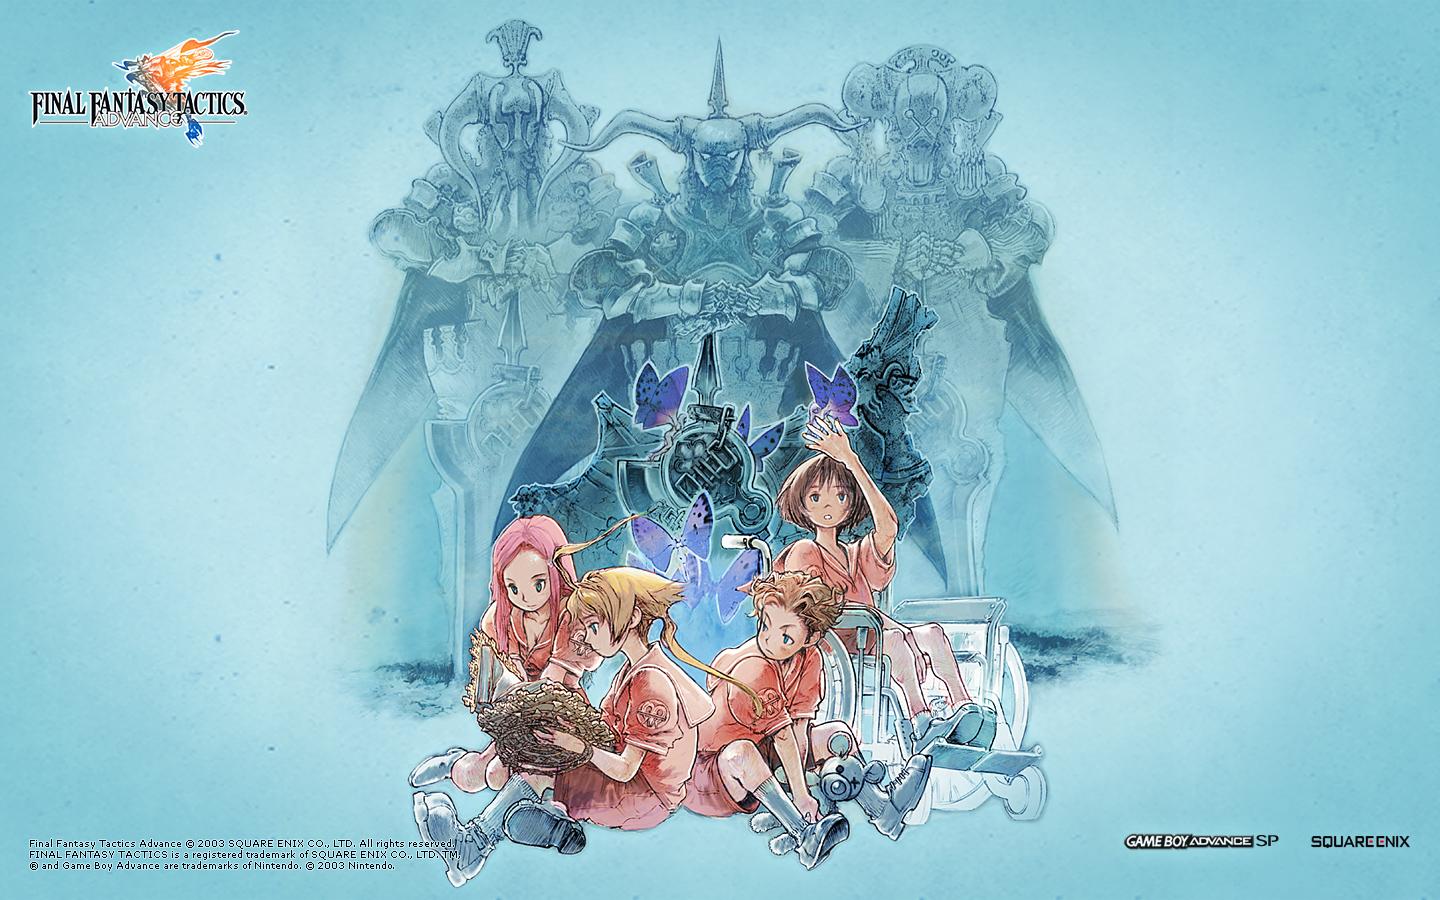 Final Fantasy Tactics HD Quality Background Image, G.sFDcY